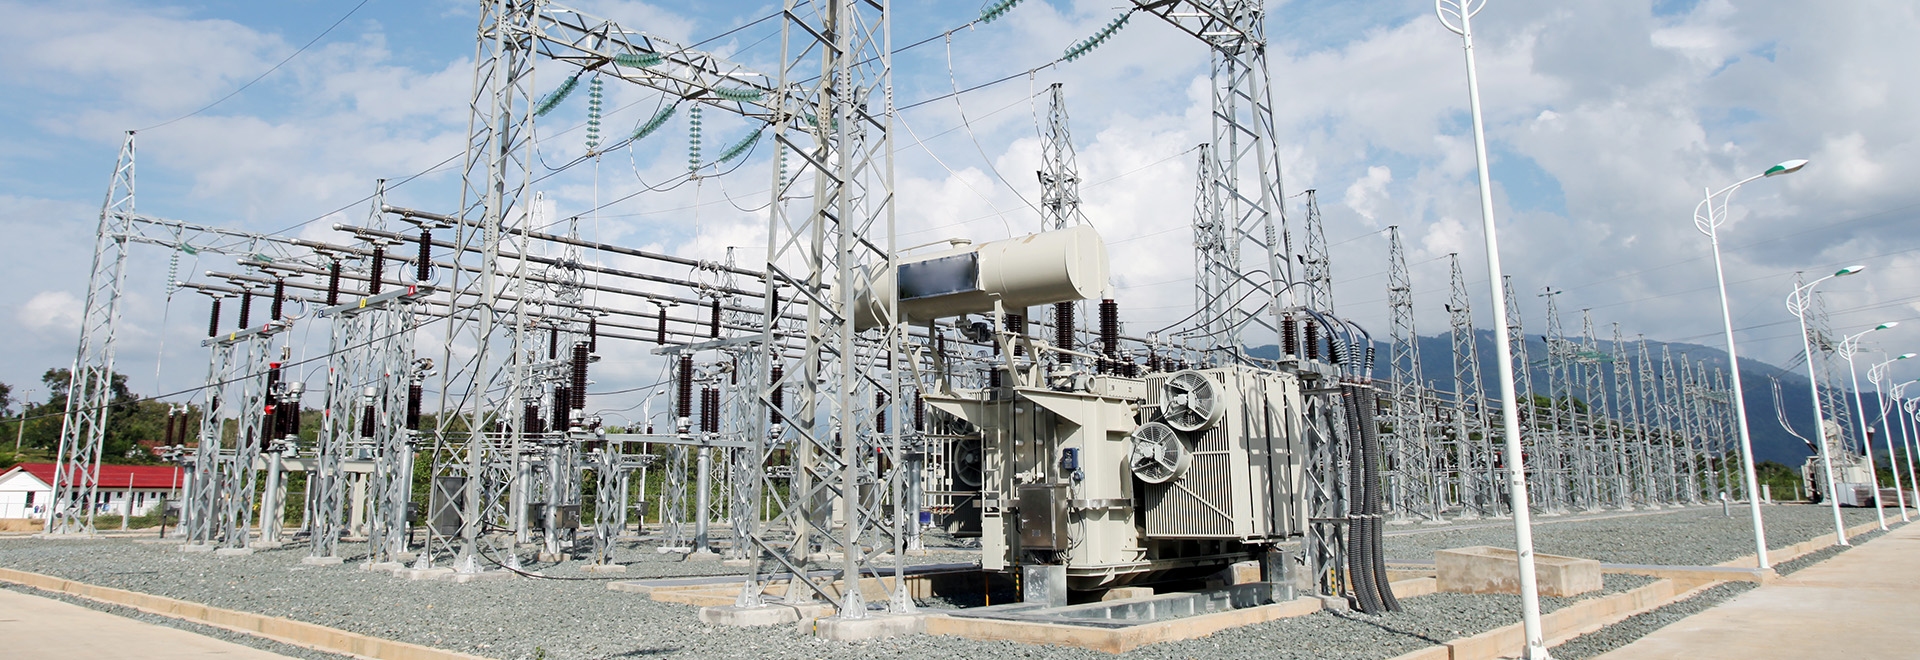 Power transmission and transformation equipment